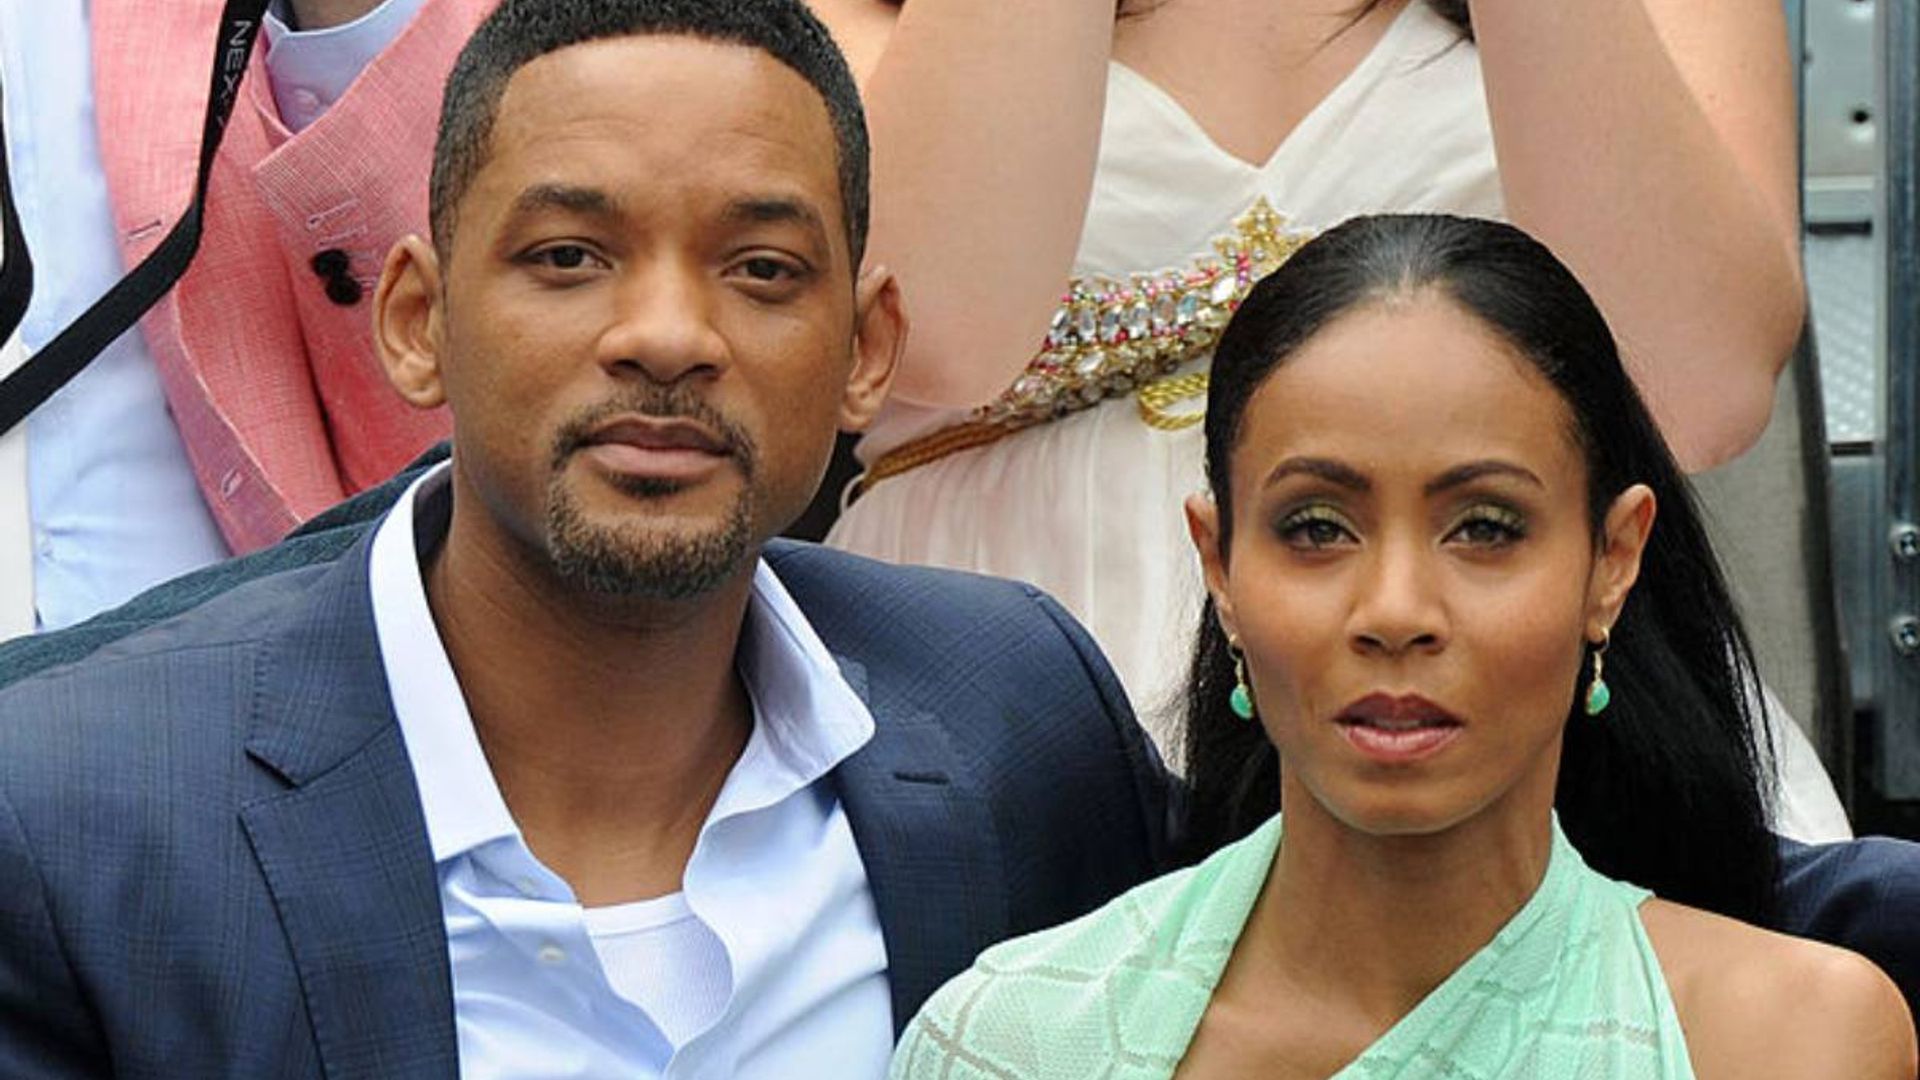 Will Smith and wife Jada Pinkett separated over the summer? - All we know about star's time in India | HELLO!